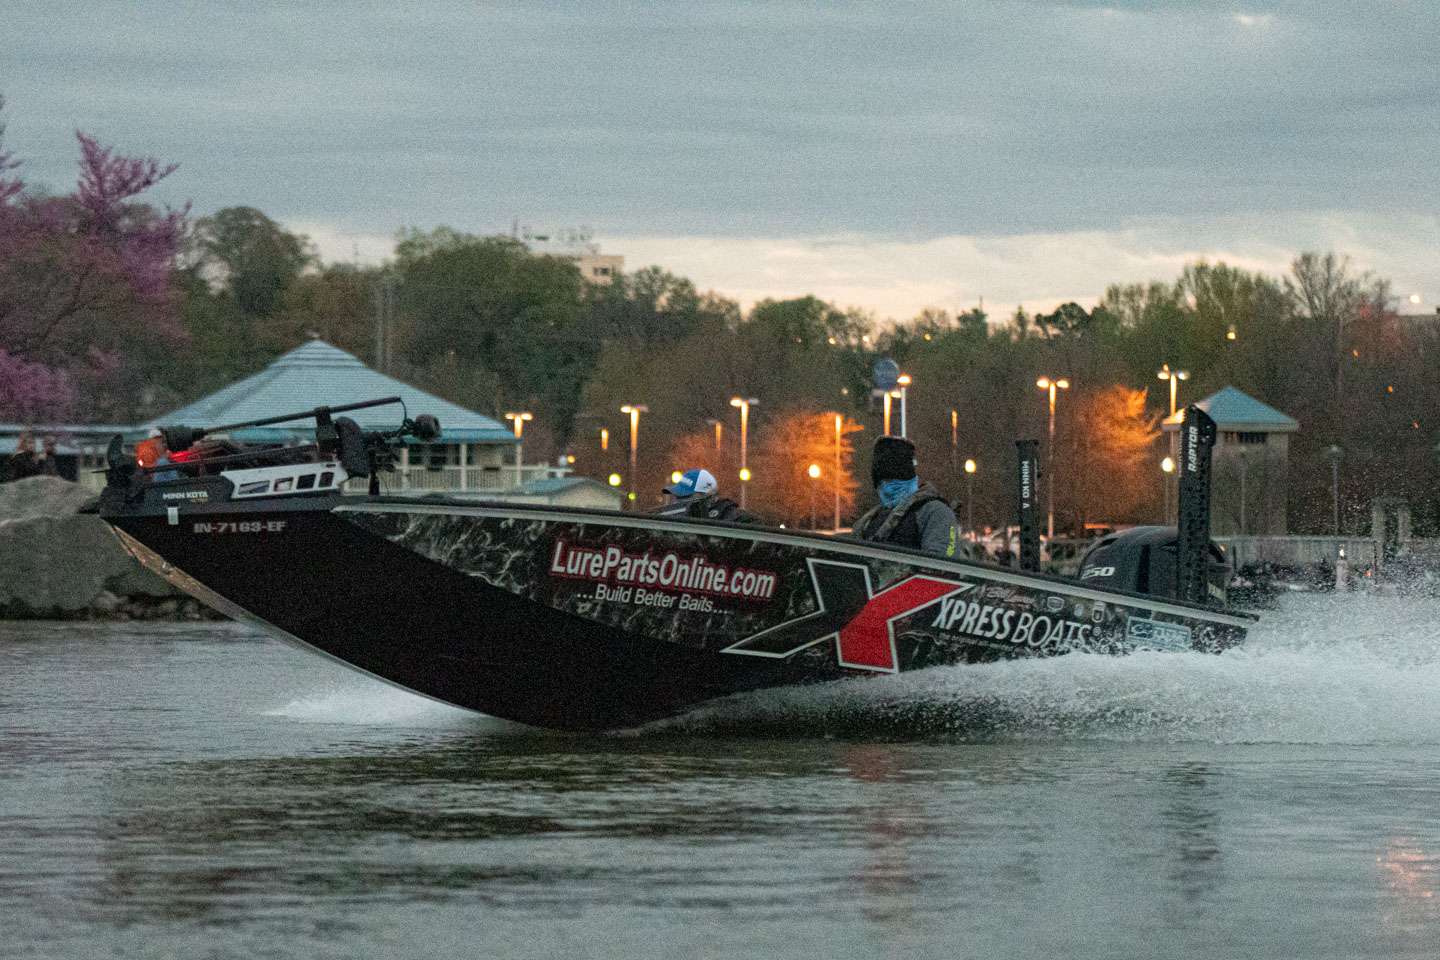 See the Elites race to their starting spots on Day 1 of the 2021 Guaranteed Rate Bassmaster Elite at Pickwick Lake! 